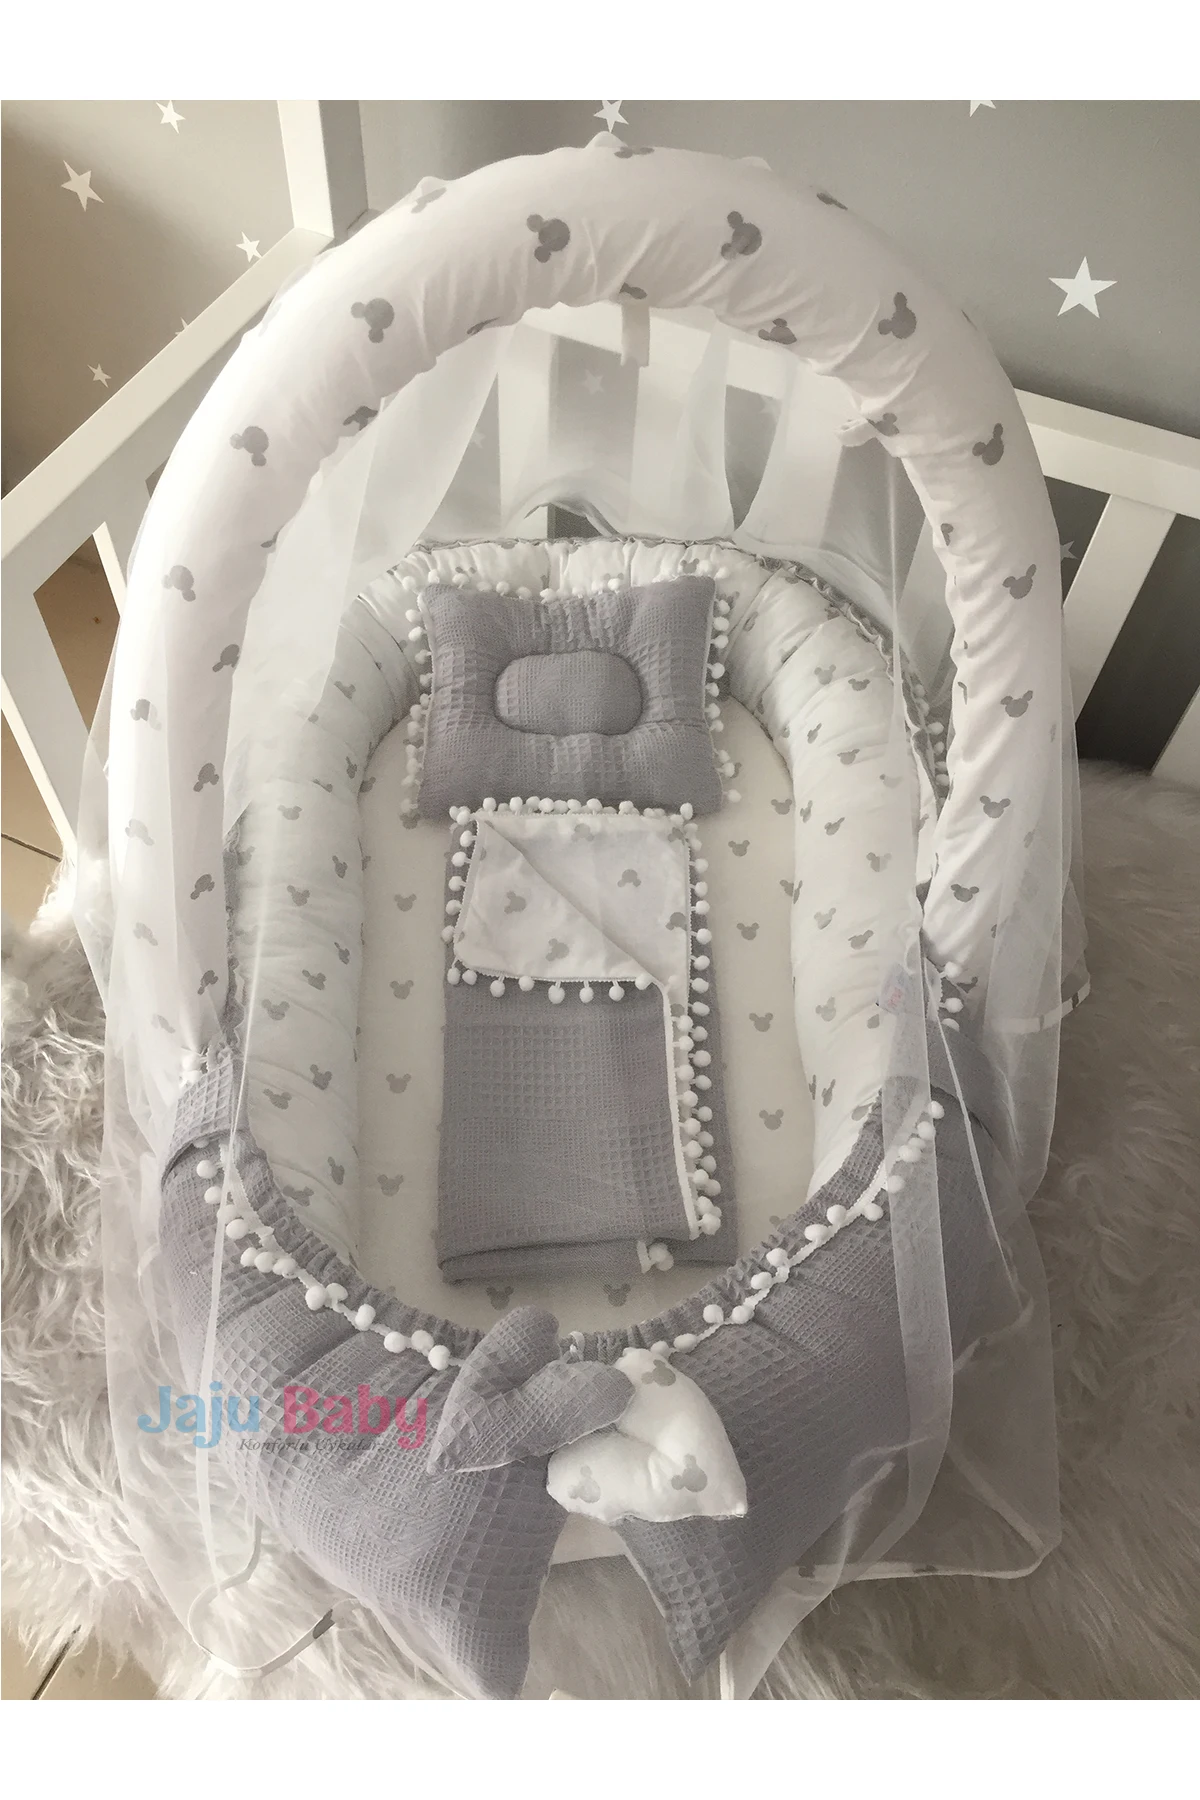 Jaju Baby Handmade Gray Waffle Pique Fabric Micky Design Pompom Babynest, Pique Toy Apparatus and Tulle Set Mother Side Portable